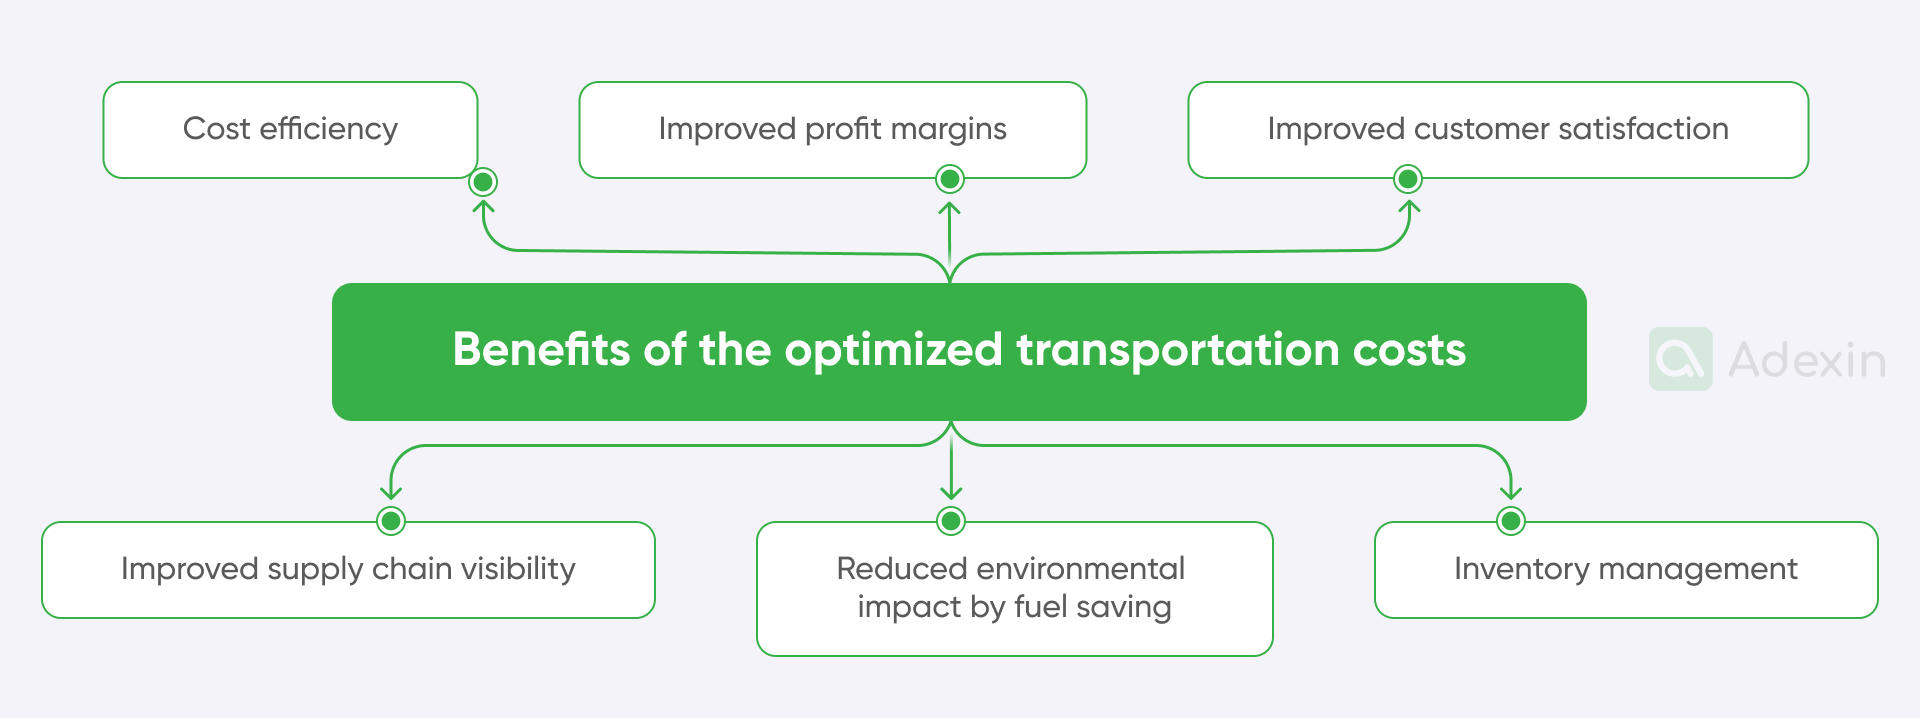 Results from optimized transportation costs